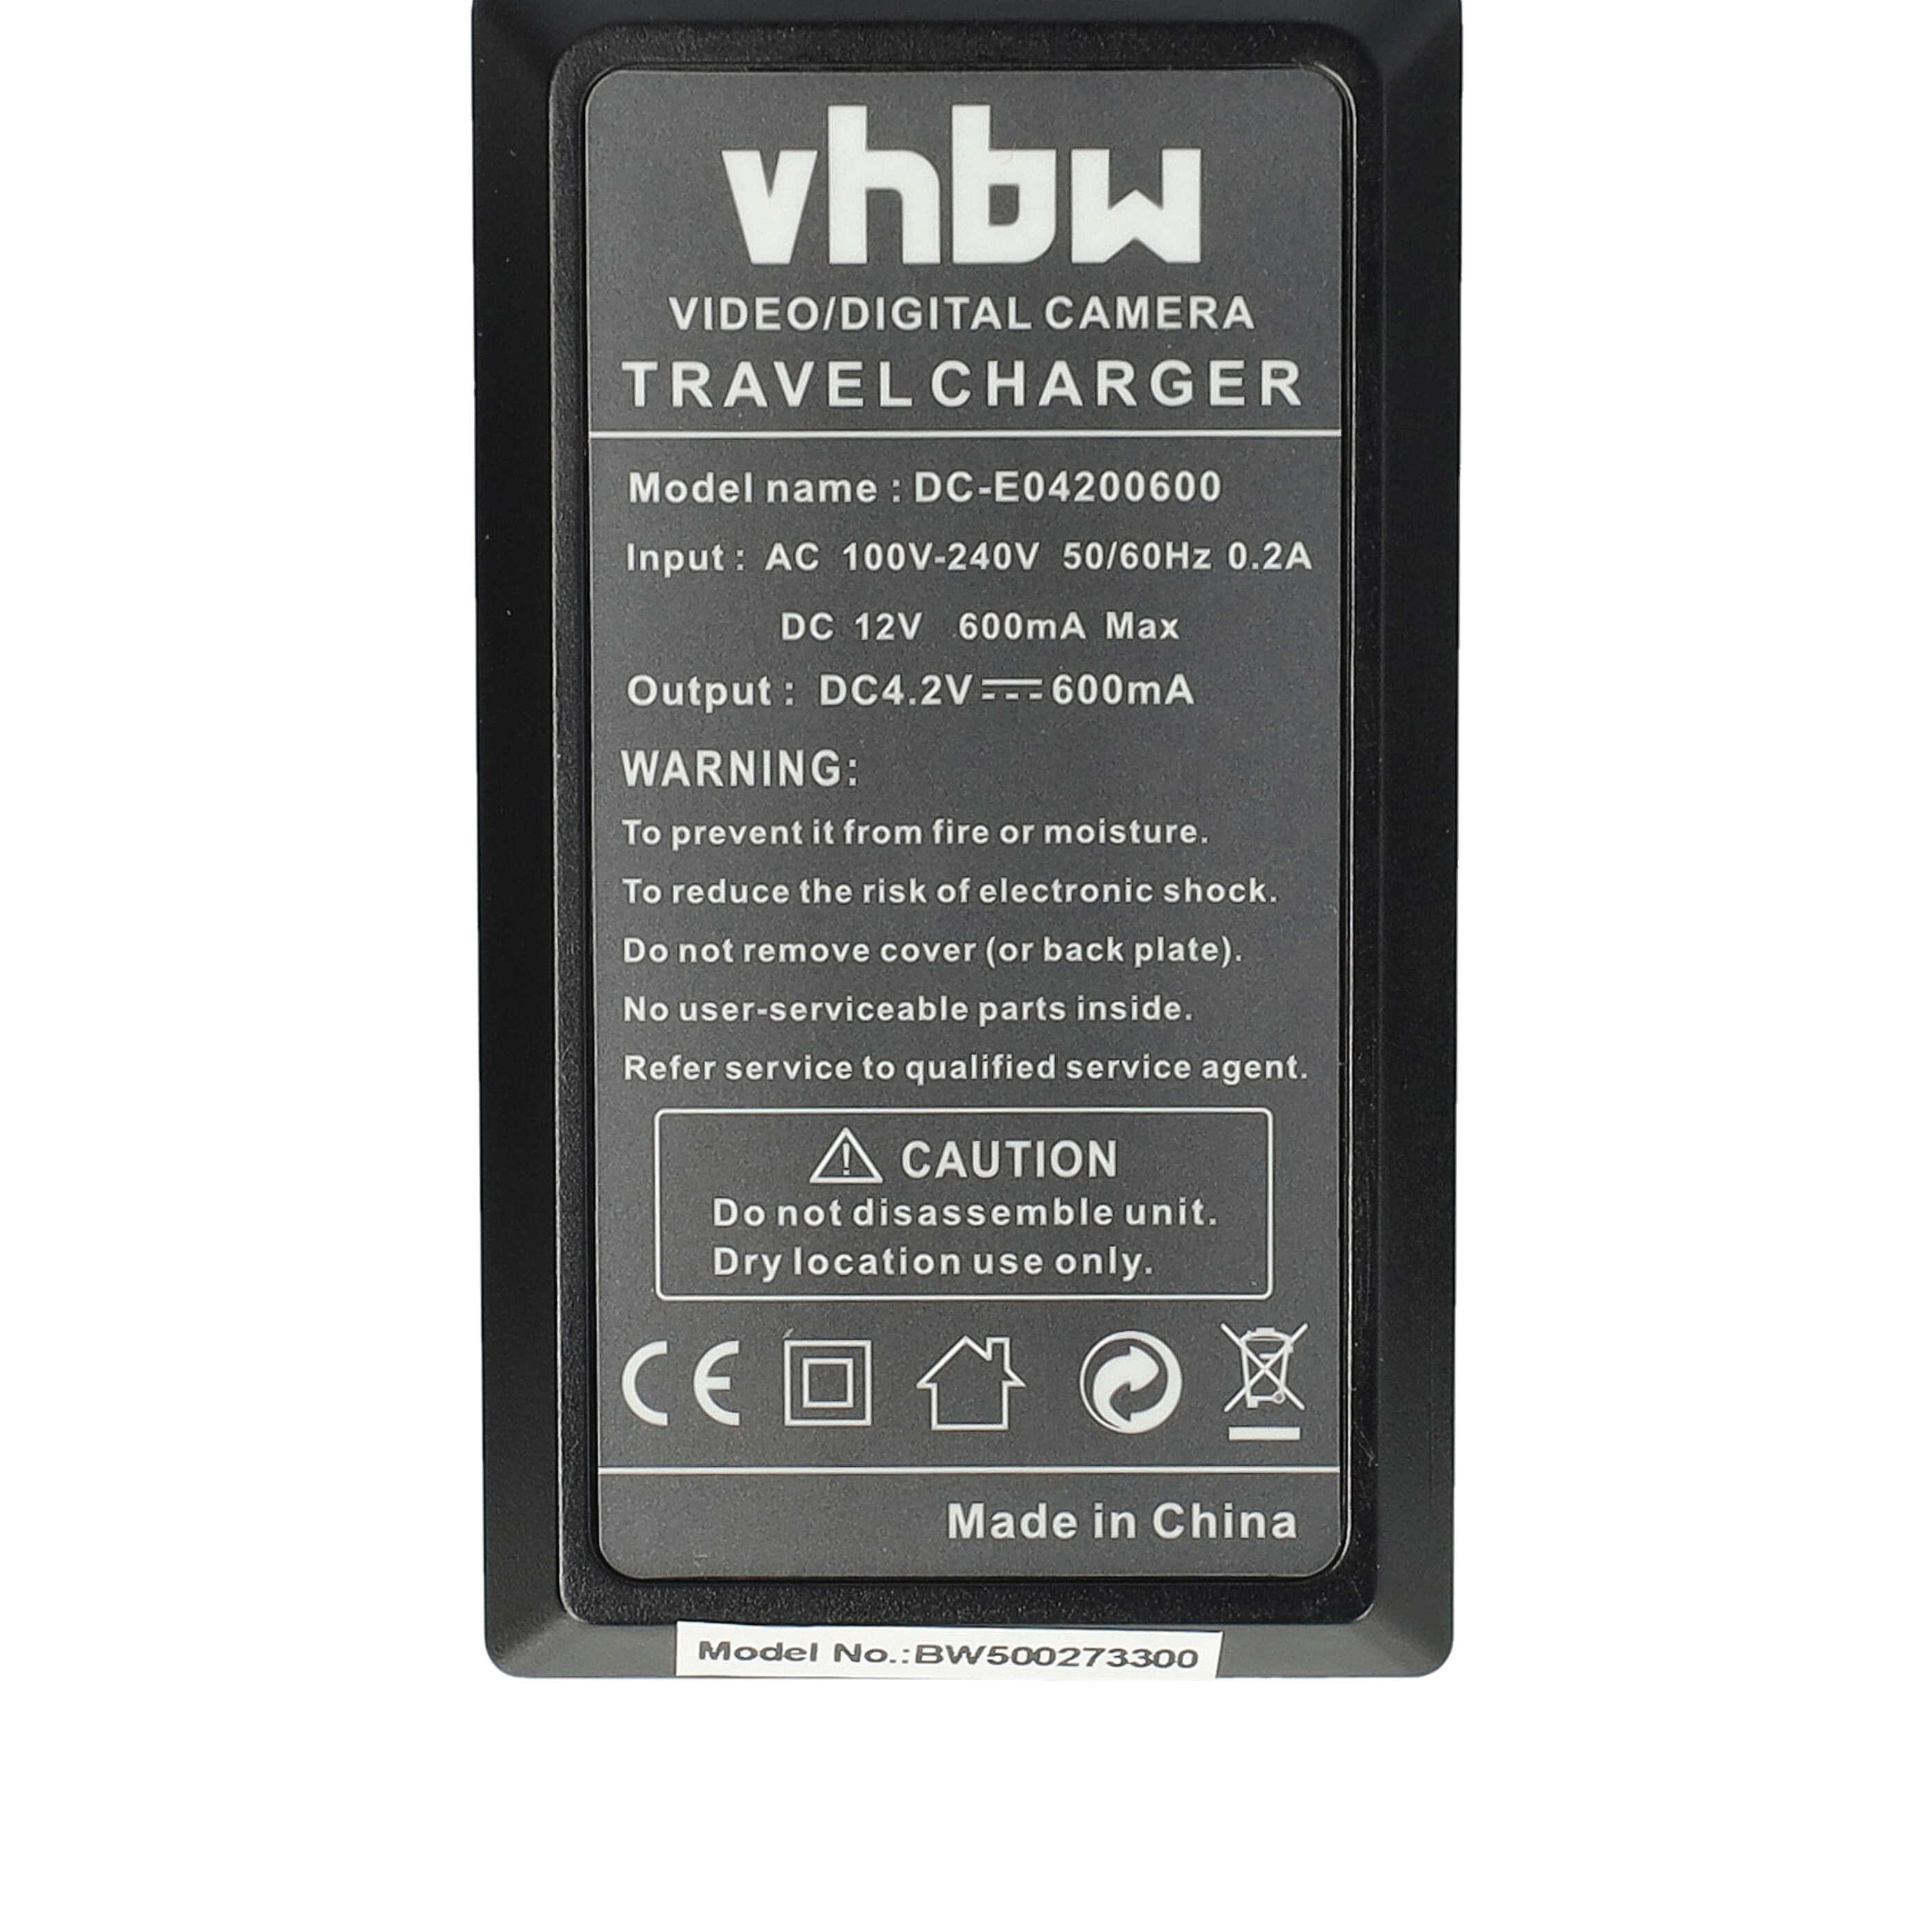 Battery Charger suitable for aquapix W510 Camera etc. - 0.6 A, 4.2 V